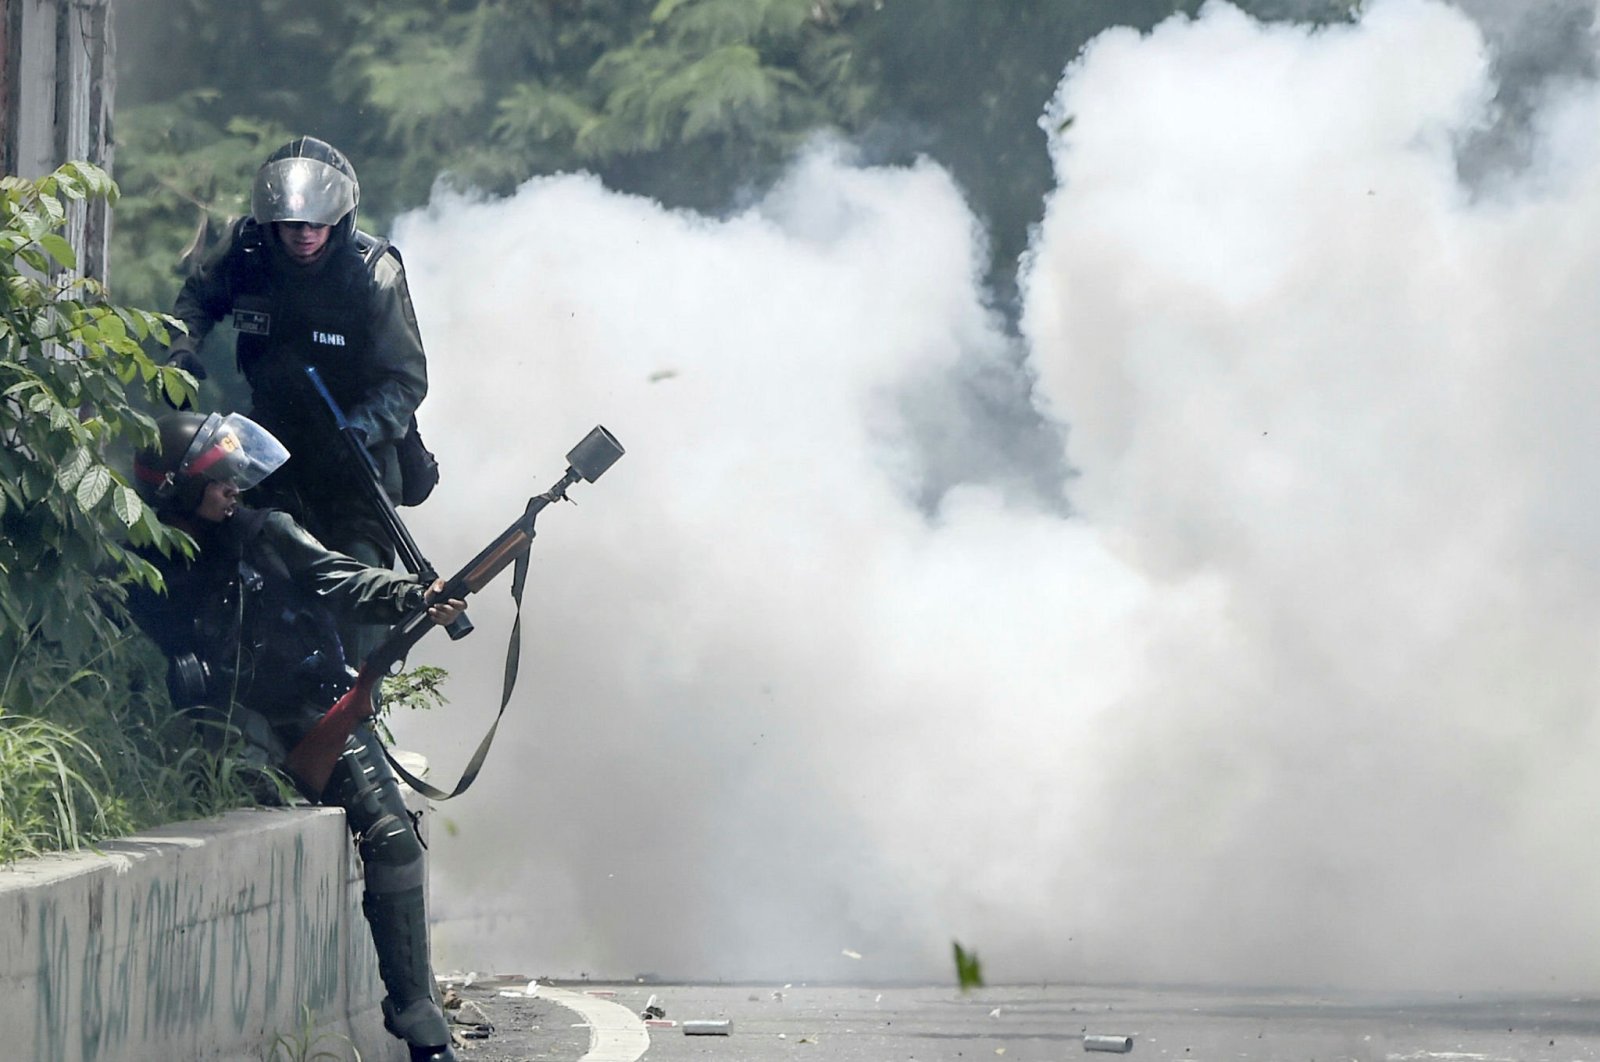 Opposition demonstrators and riot police clash during an anti-government protest in Caracas, Venezuela, July 20, 2017. (AFP Photo)